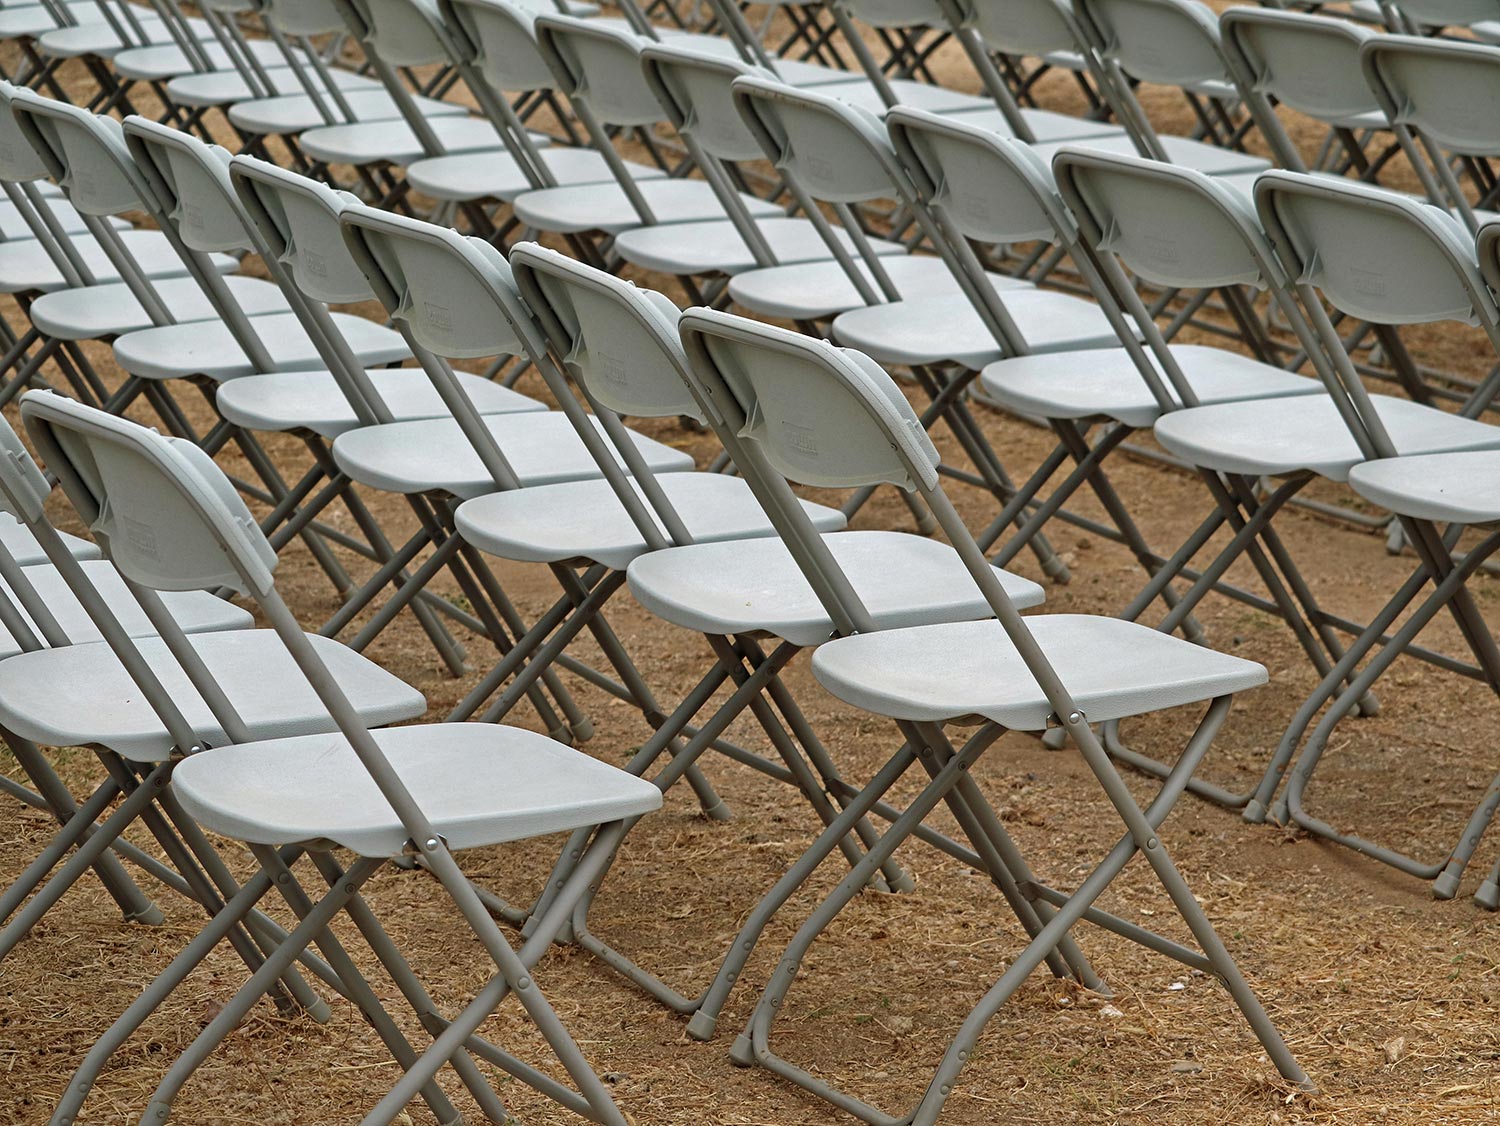 White chairs on sandy ground lined up for a presentation